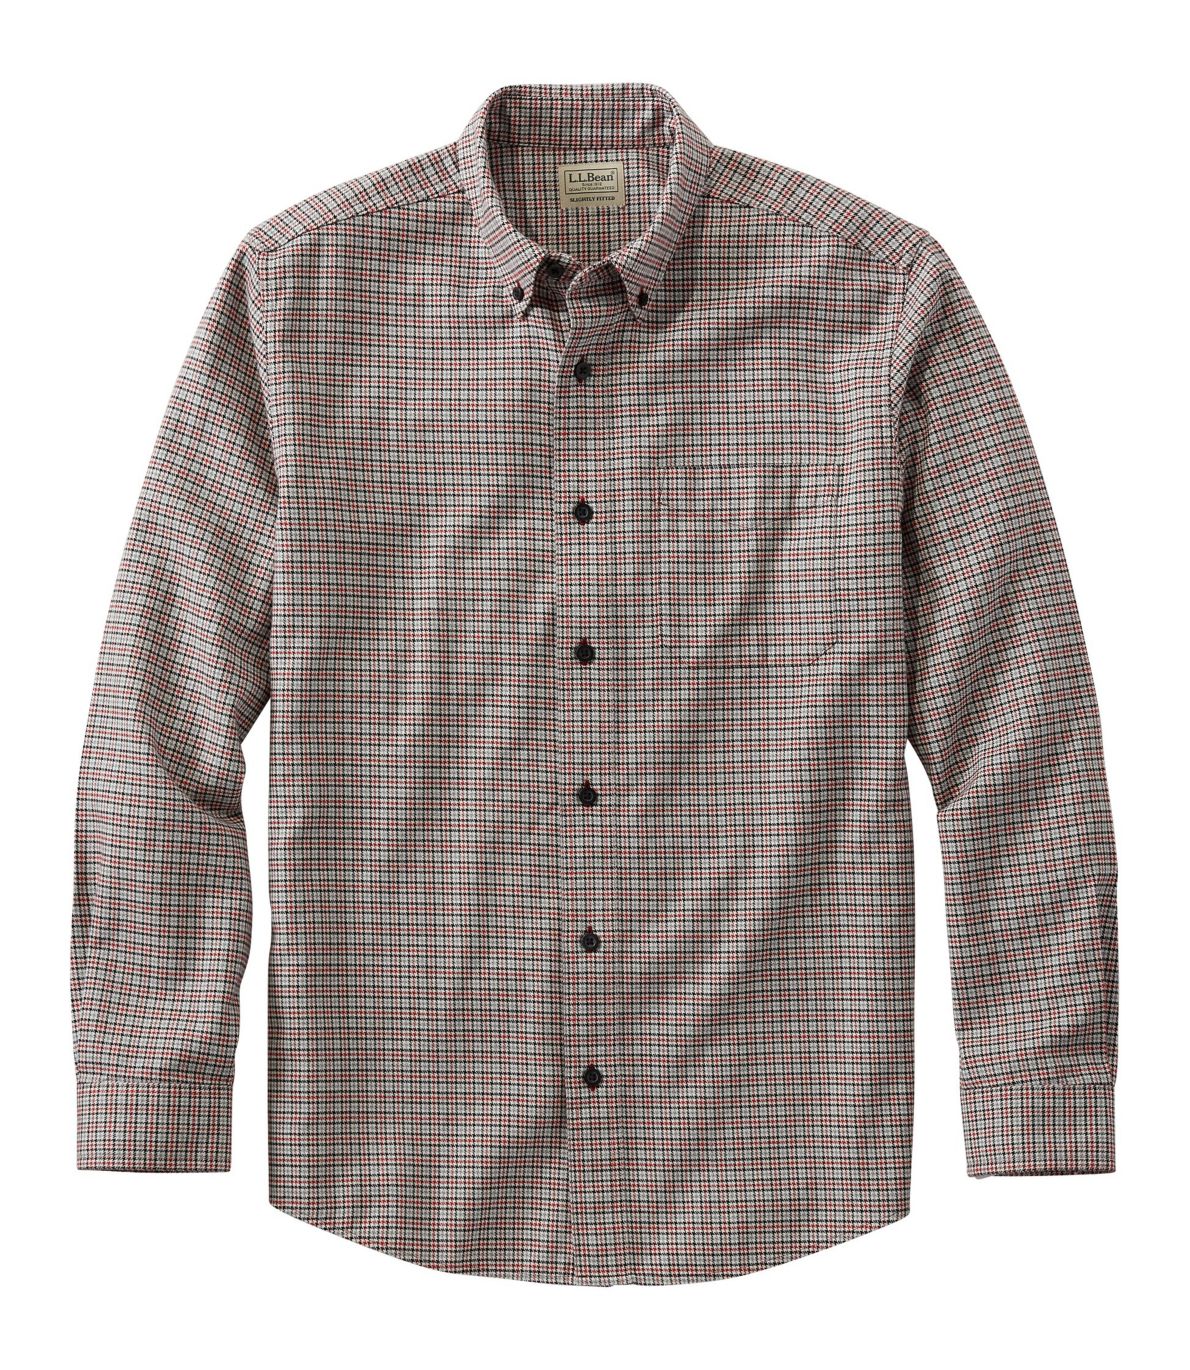 Men's Wicked Good Flannel Shirt, Slightly Fitted, Houndstooth